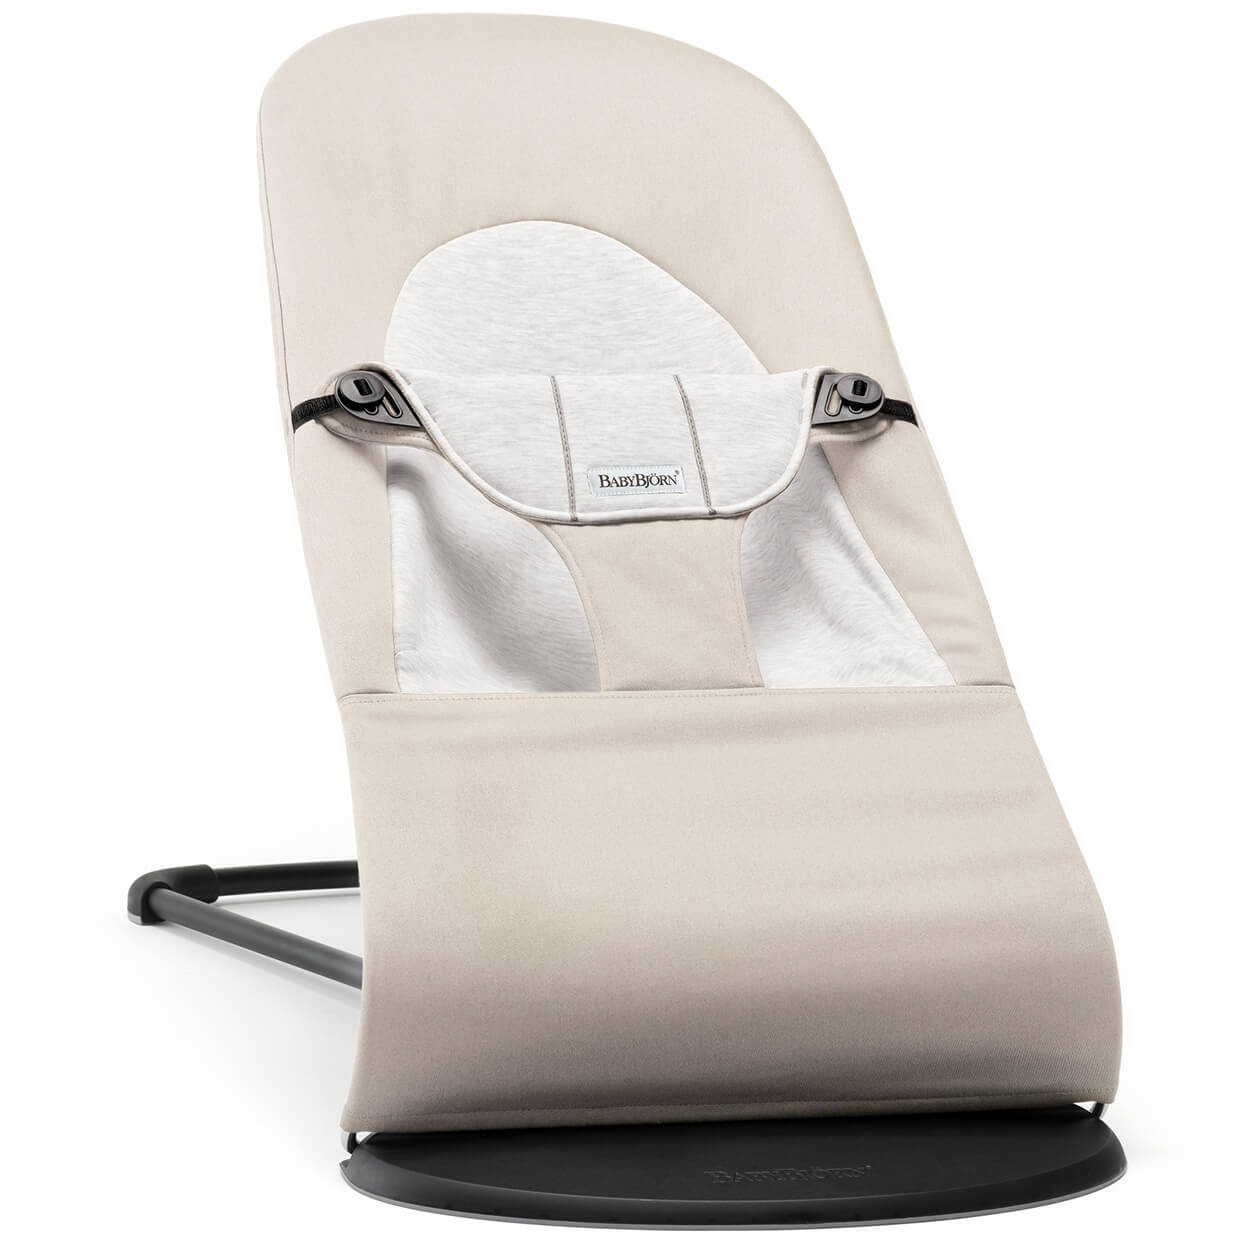 BABYBJORN Bouncer Balance Soft Cotton / Jersey - Beige and Grey